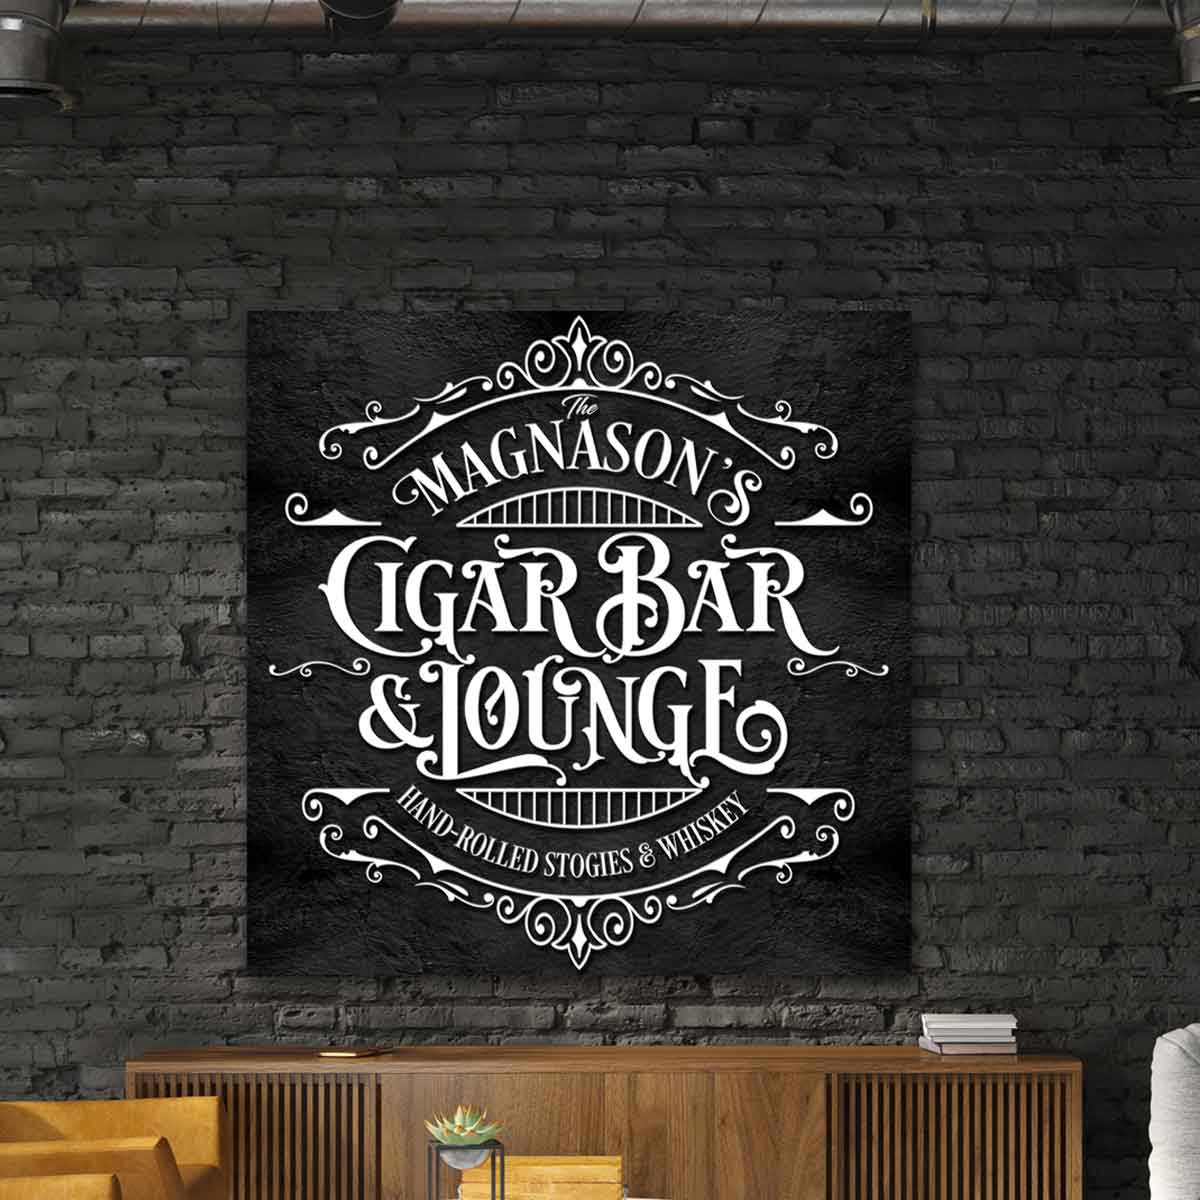 Cigar Bar Sign on black stone with white lettering that says: family name, Cigar Bar and Lounge, hand rolled stogies and whiskey